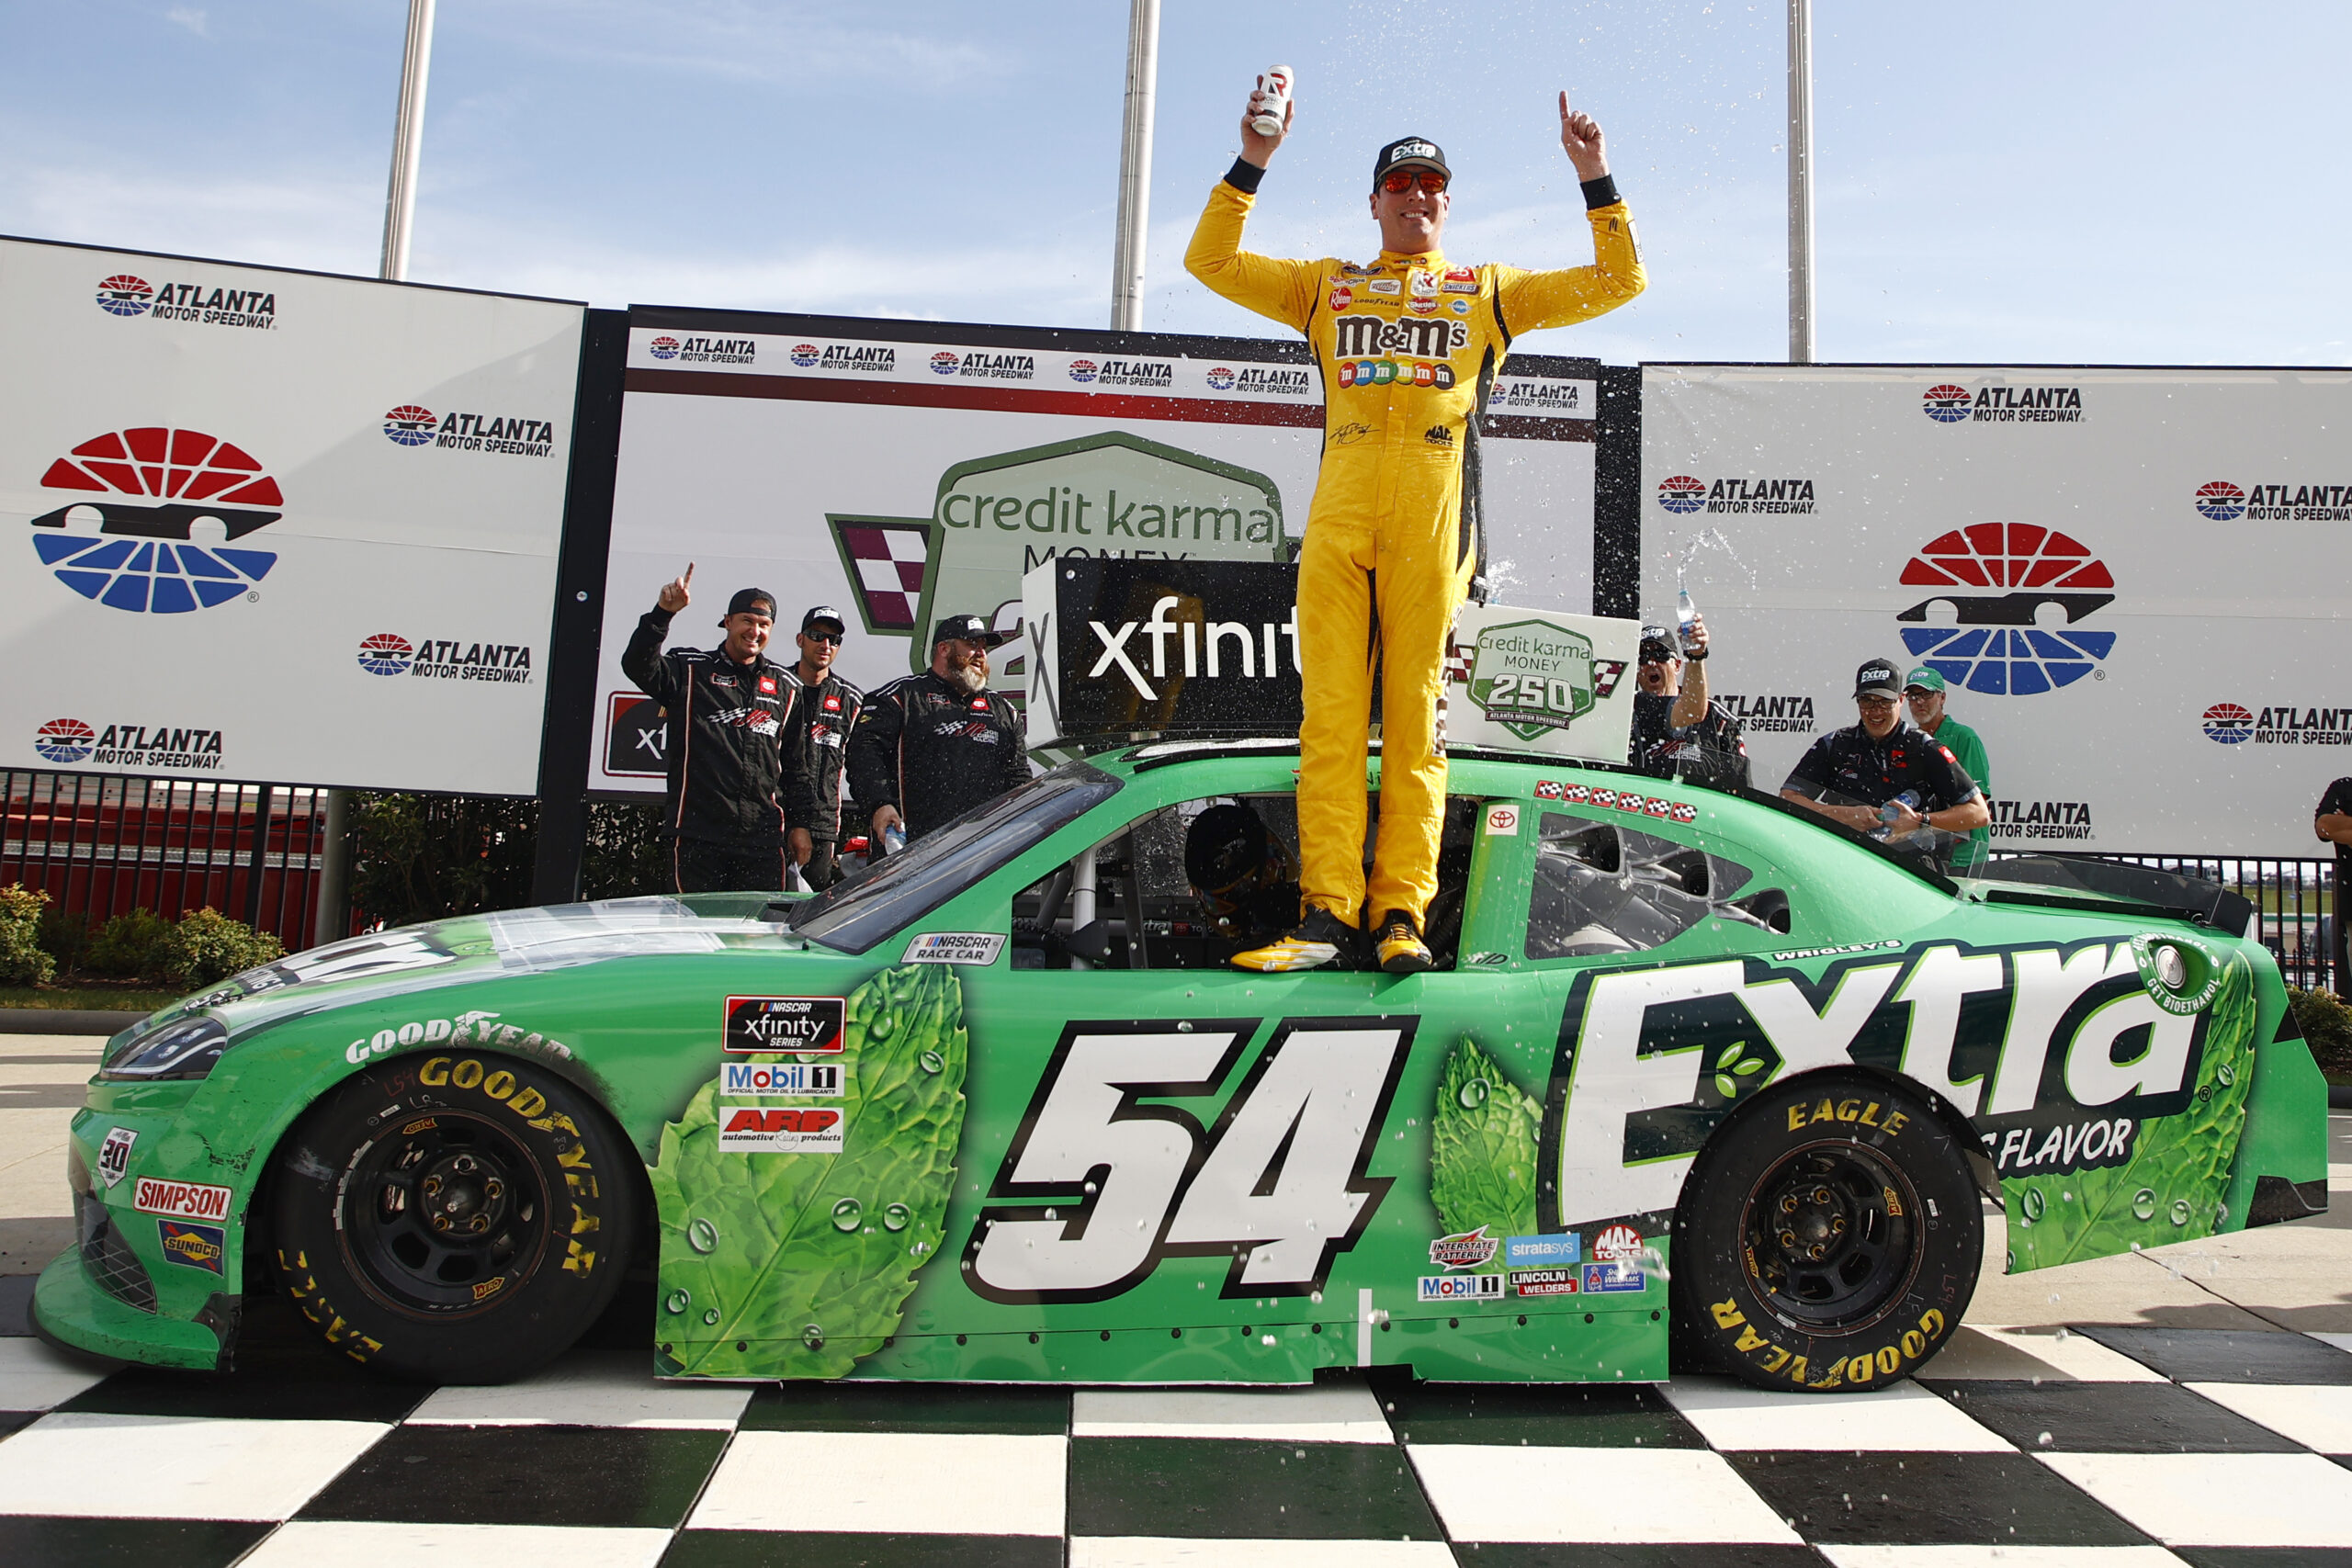 Ultimately, Kyle Busch scored his 102nd NASCAR XFINITY Series win. (Photo: Jared C. Tilton/Getty Images)